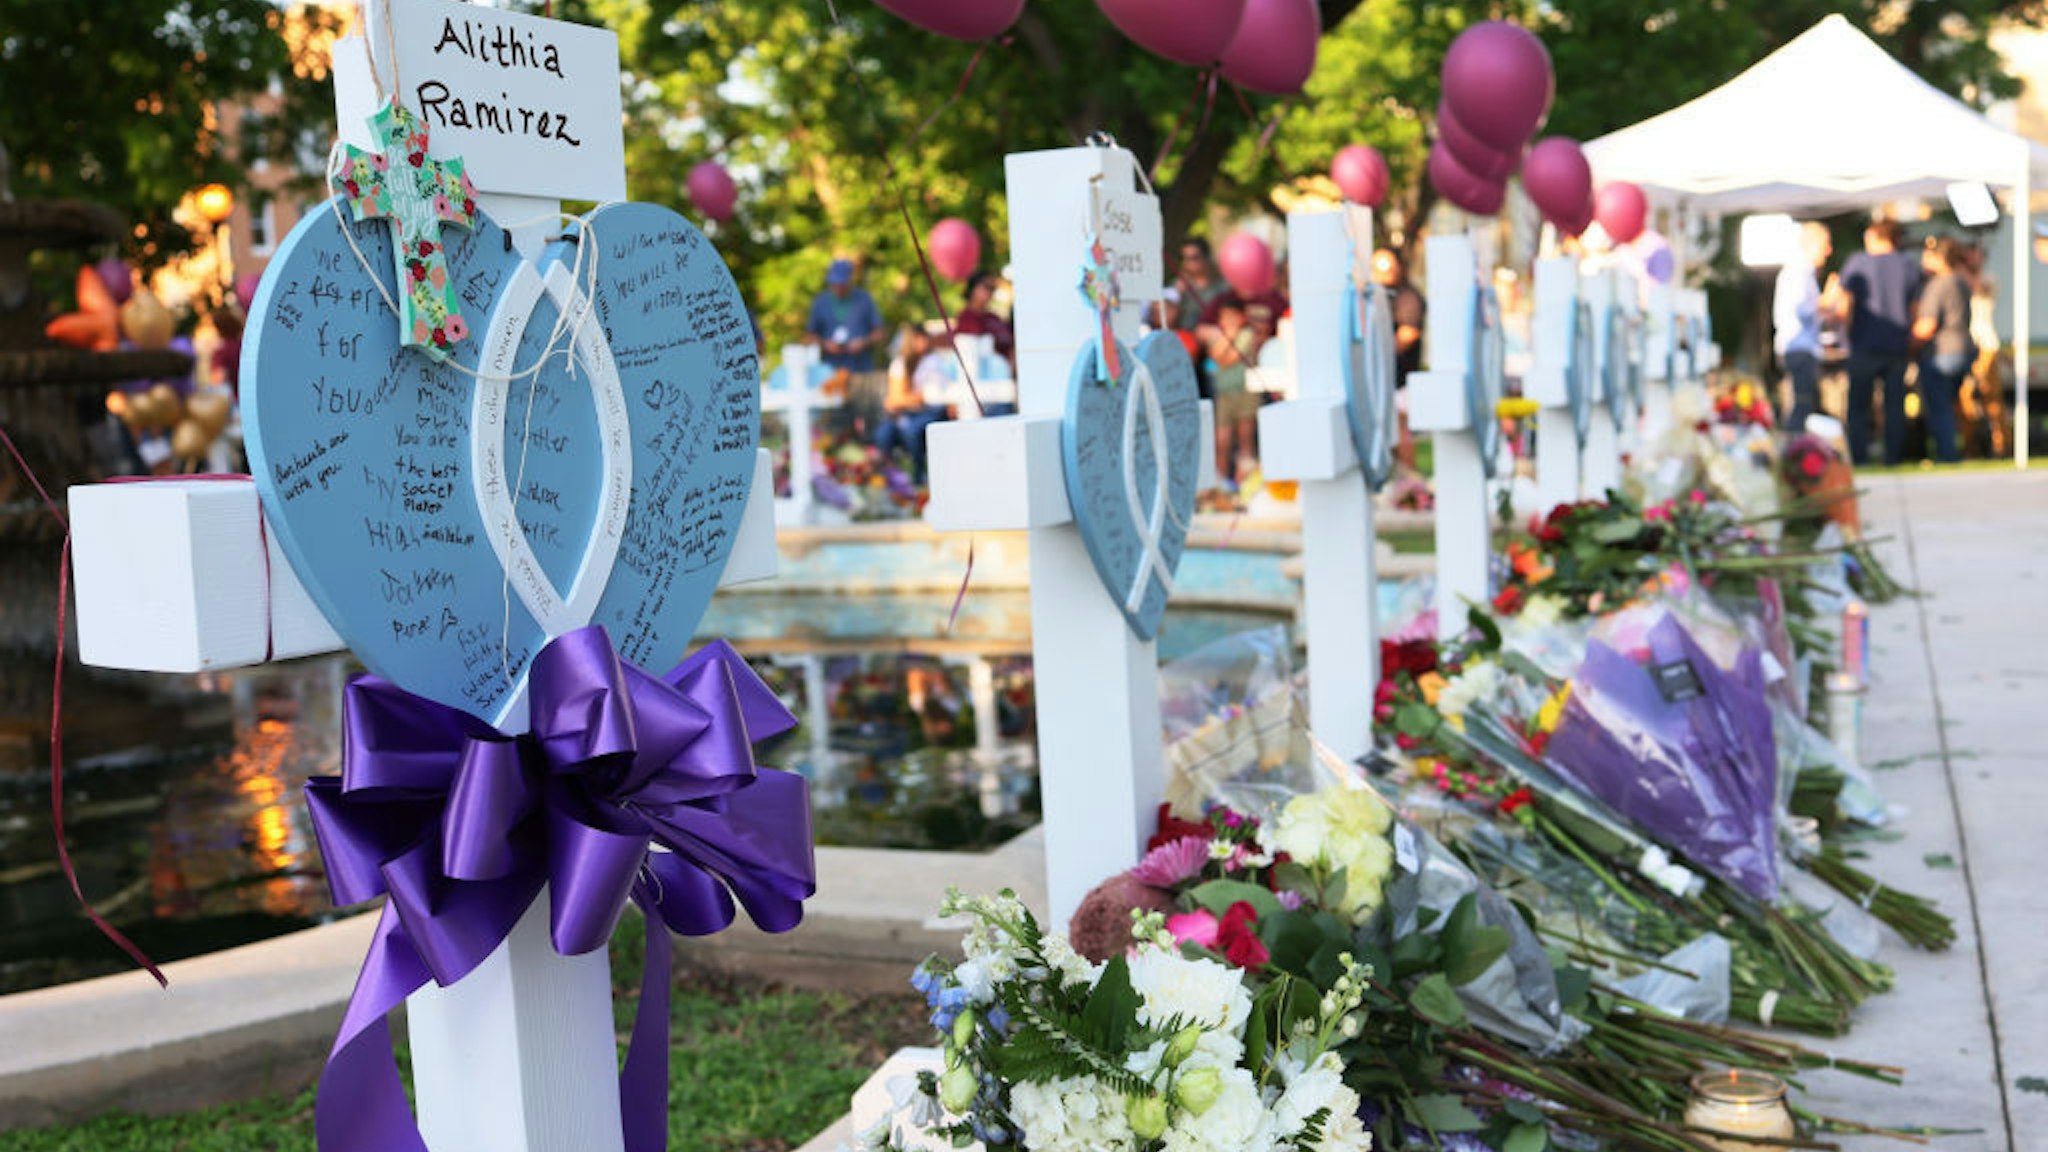 UVALDE, TEXAS - MAY 26: Memorials for victims of Tuesday's mass shooting at a Texas elementary school, in City of Uvalde Town Square on May 26, 2022 in Uvalde, Texas. Nineteen children and two adults were killed at Robb Elementary School after a man entered the school through an unlocked door and barricaded himself in a classroom where the victims were located. (Photo by Michael M. Santiago/Getty Images)